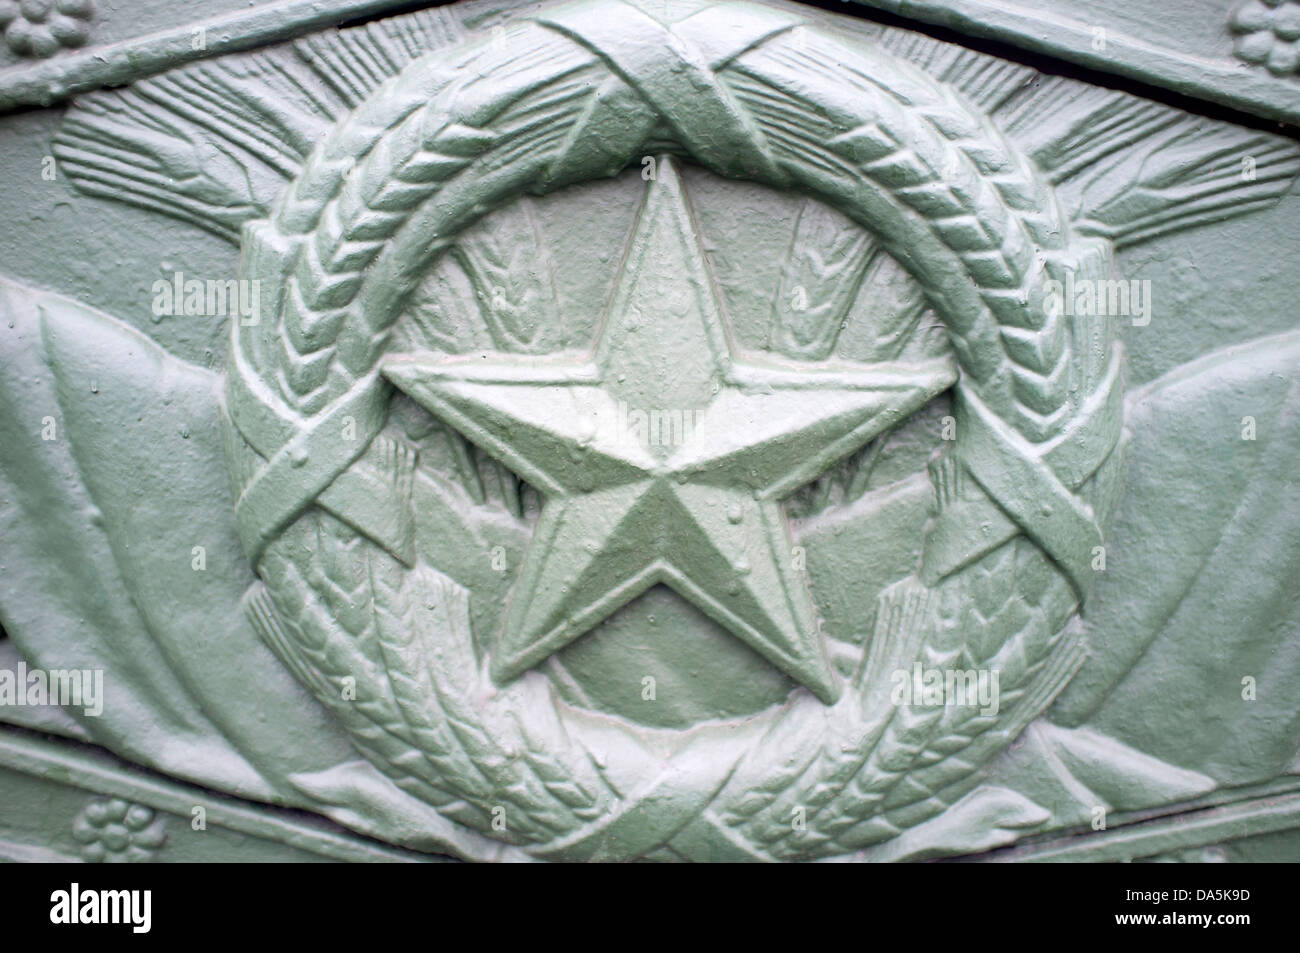 Star details carved in stone on a bridge balustrade. Stock Photo